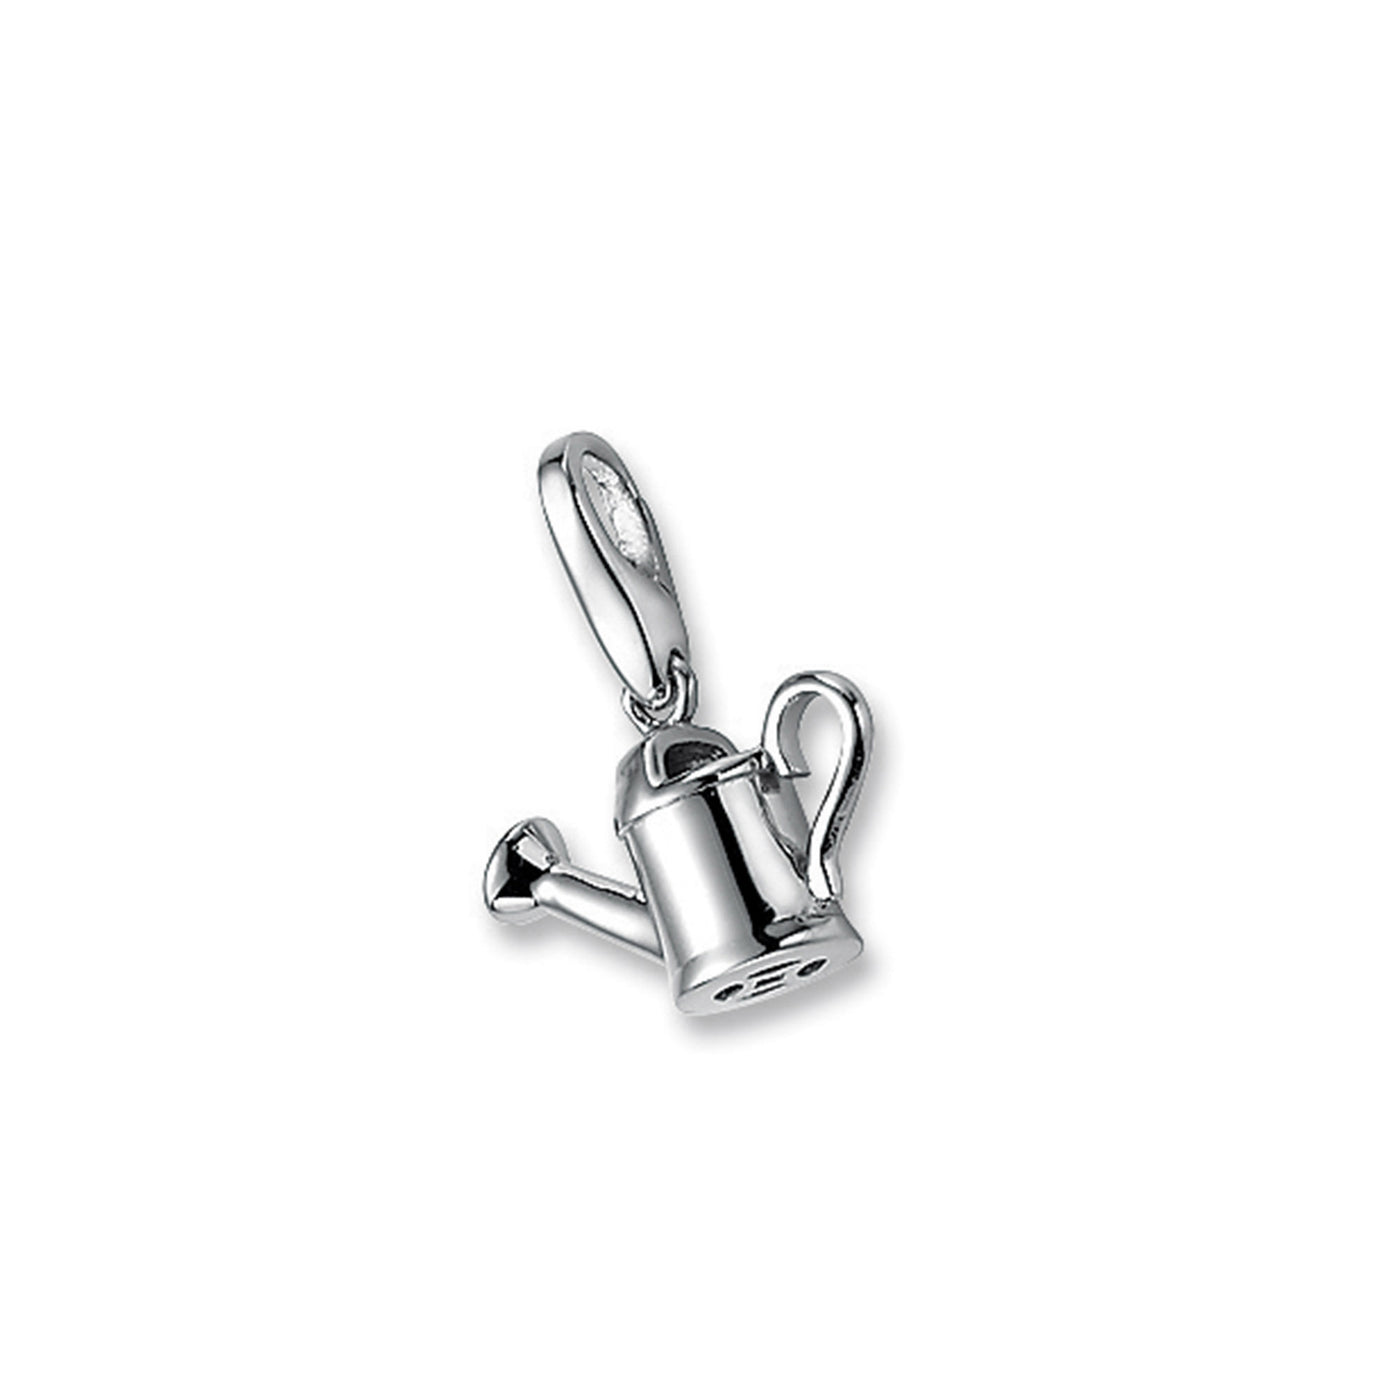 Rebecca Sloane Sterling Silver Watering Can Charm